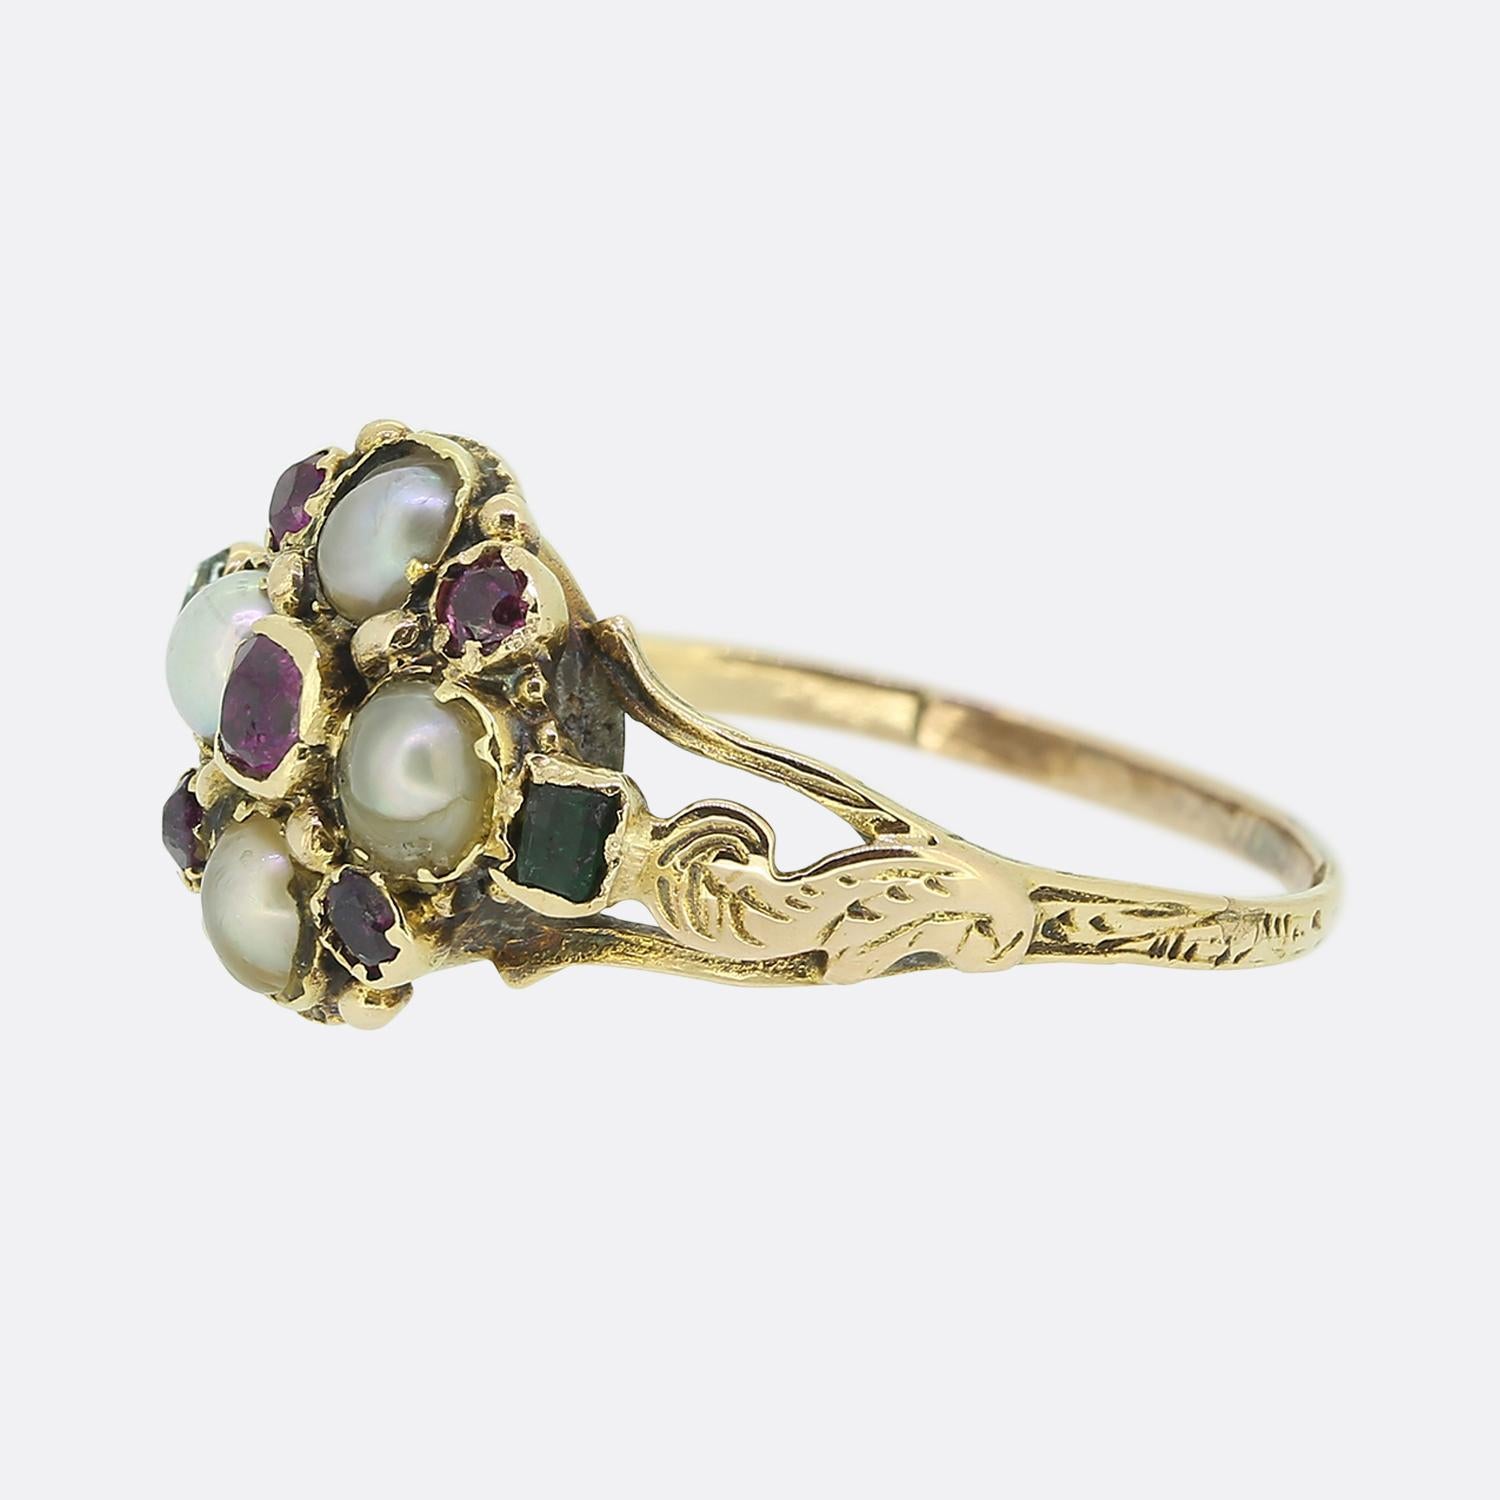 Here we have a charming cluster ring originally dating back to the Georgian period. A quartet of rounded natural pearls dominate the face with an array of almandine garnets neatly nestled in between. A single emerald at either side flanks the main